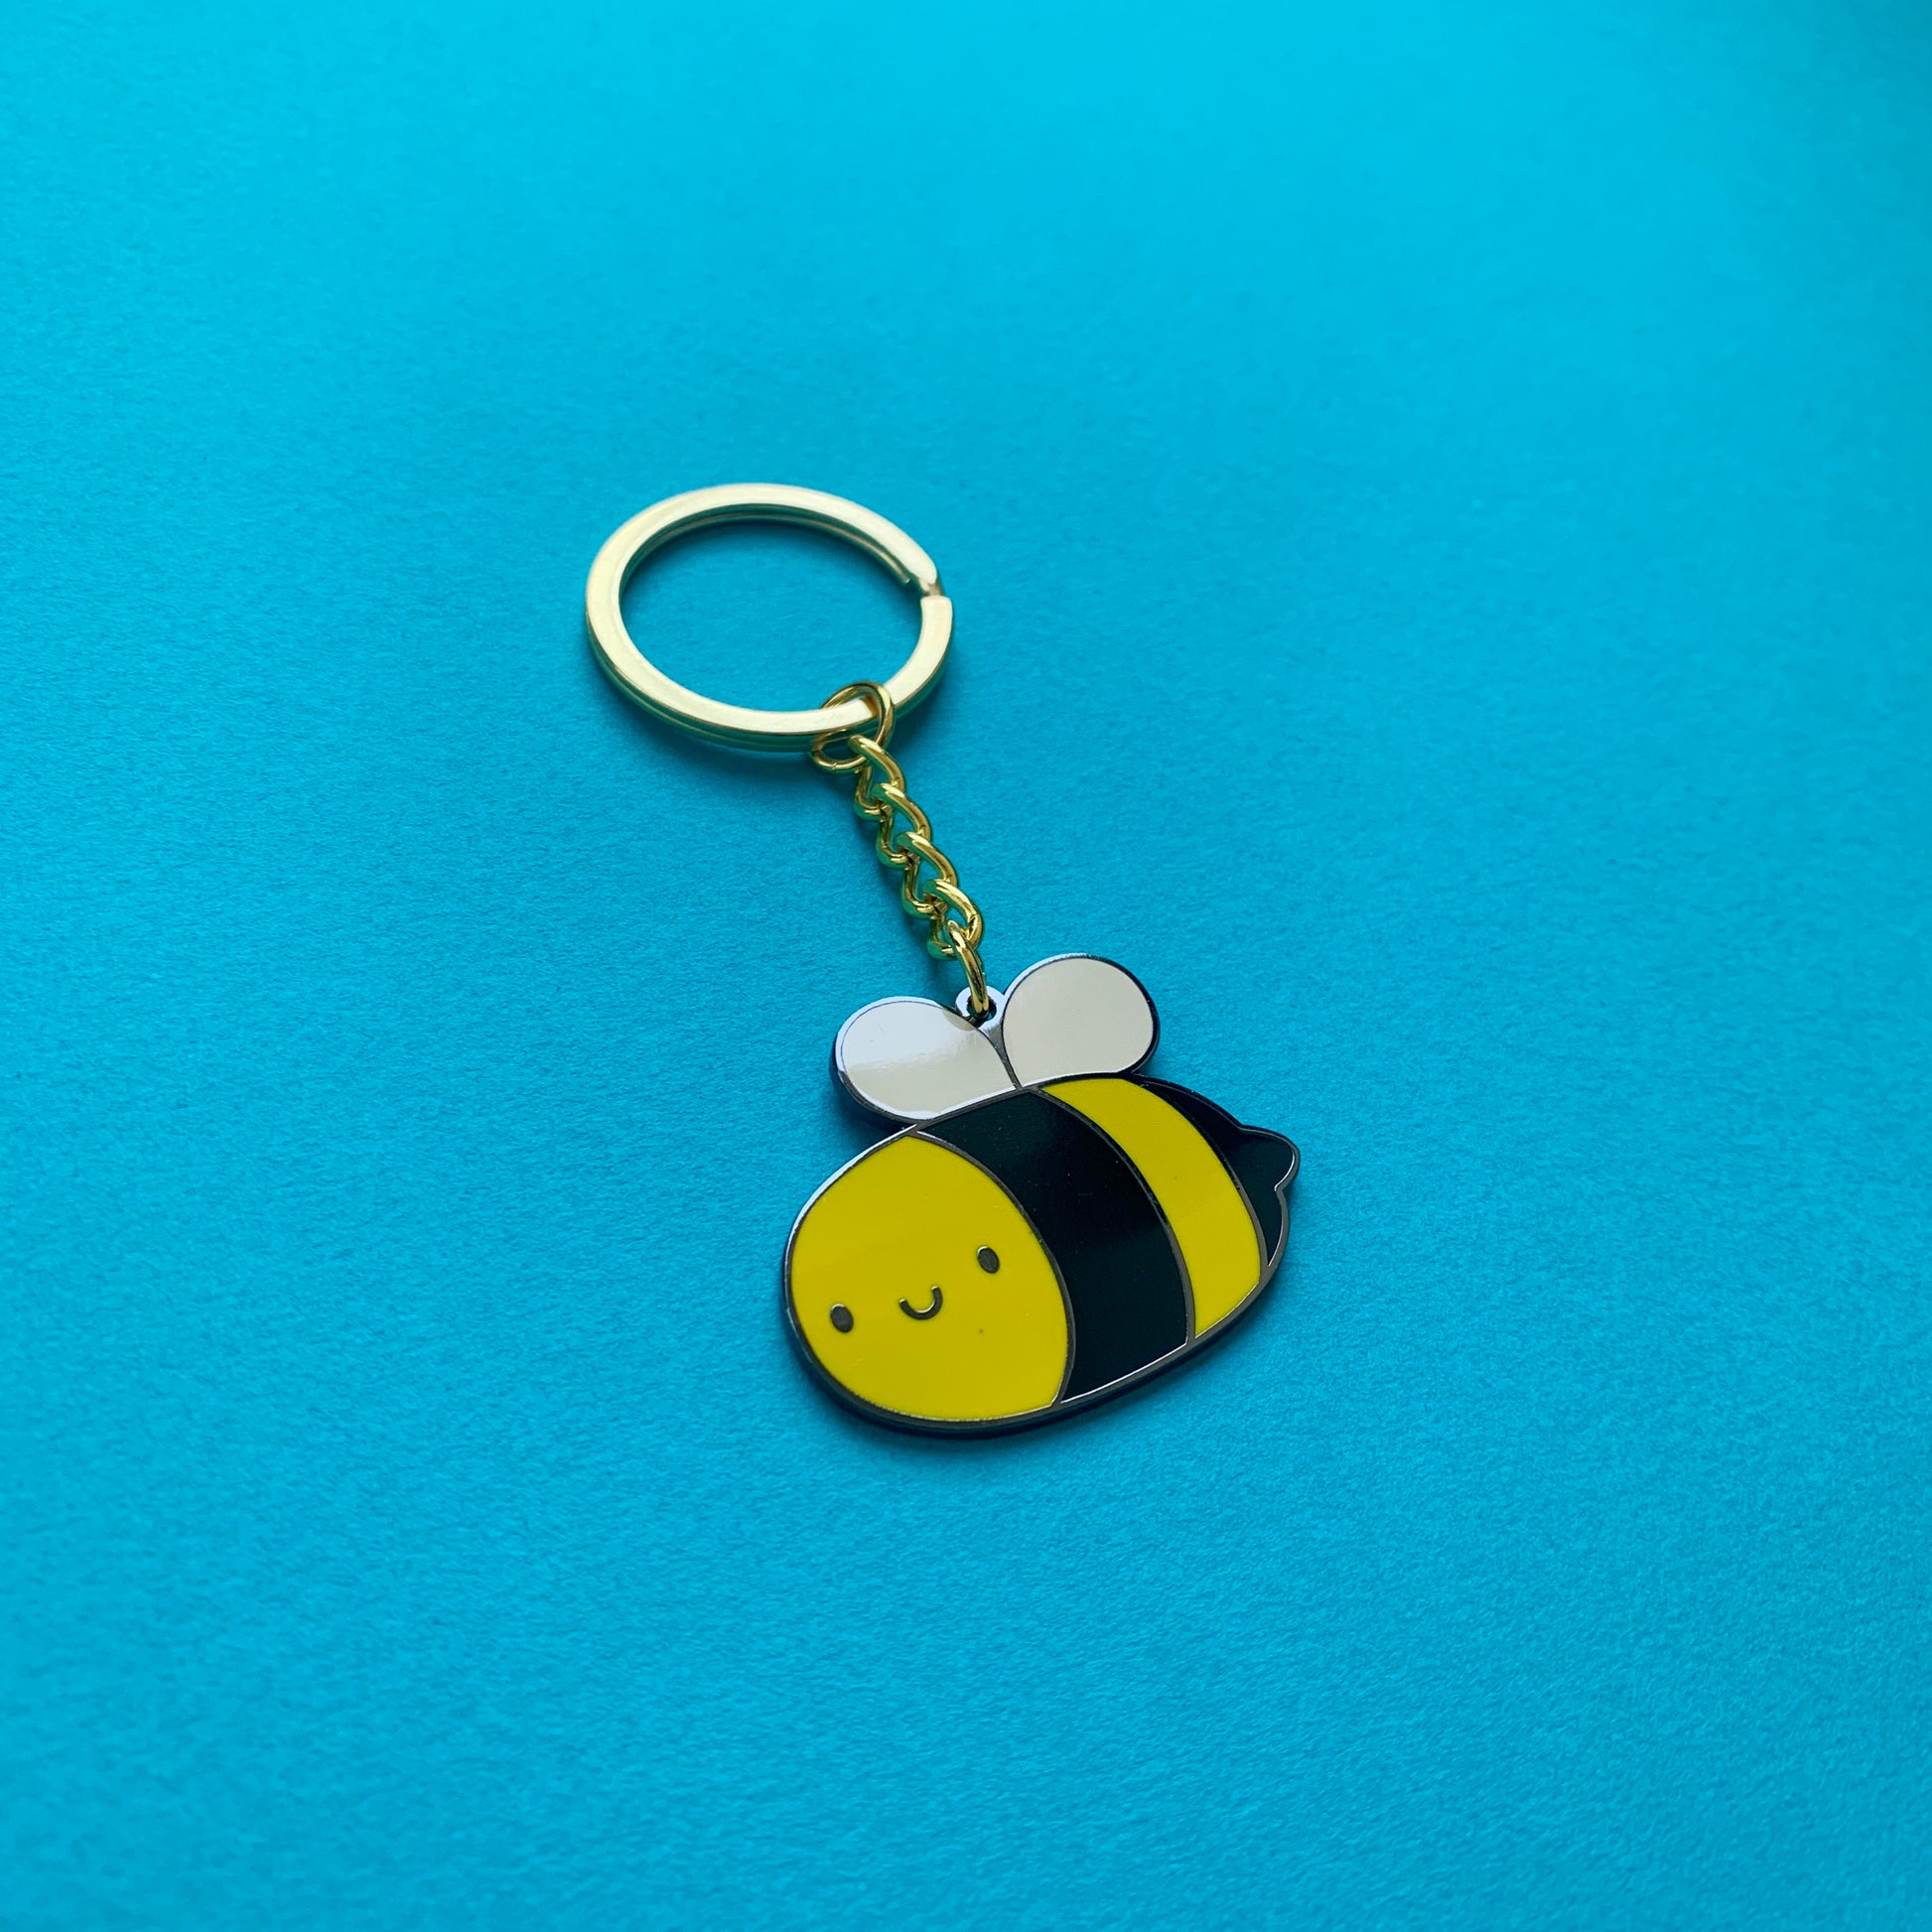 Bumble Bee Keychain – PeachyApricot